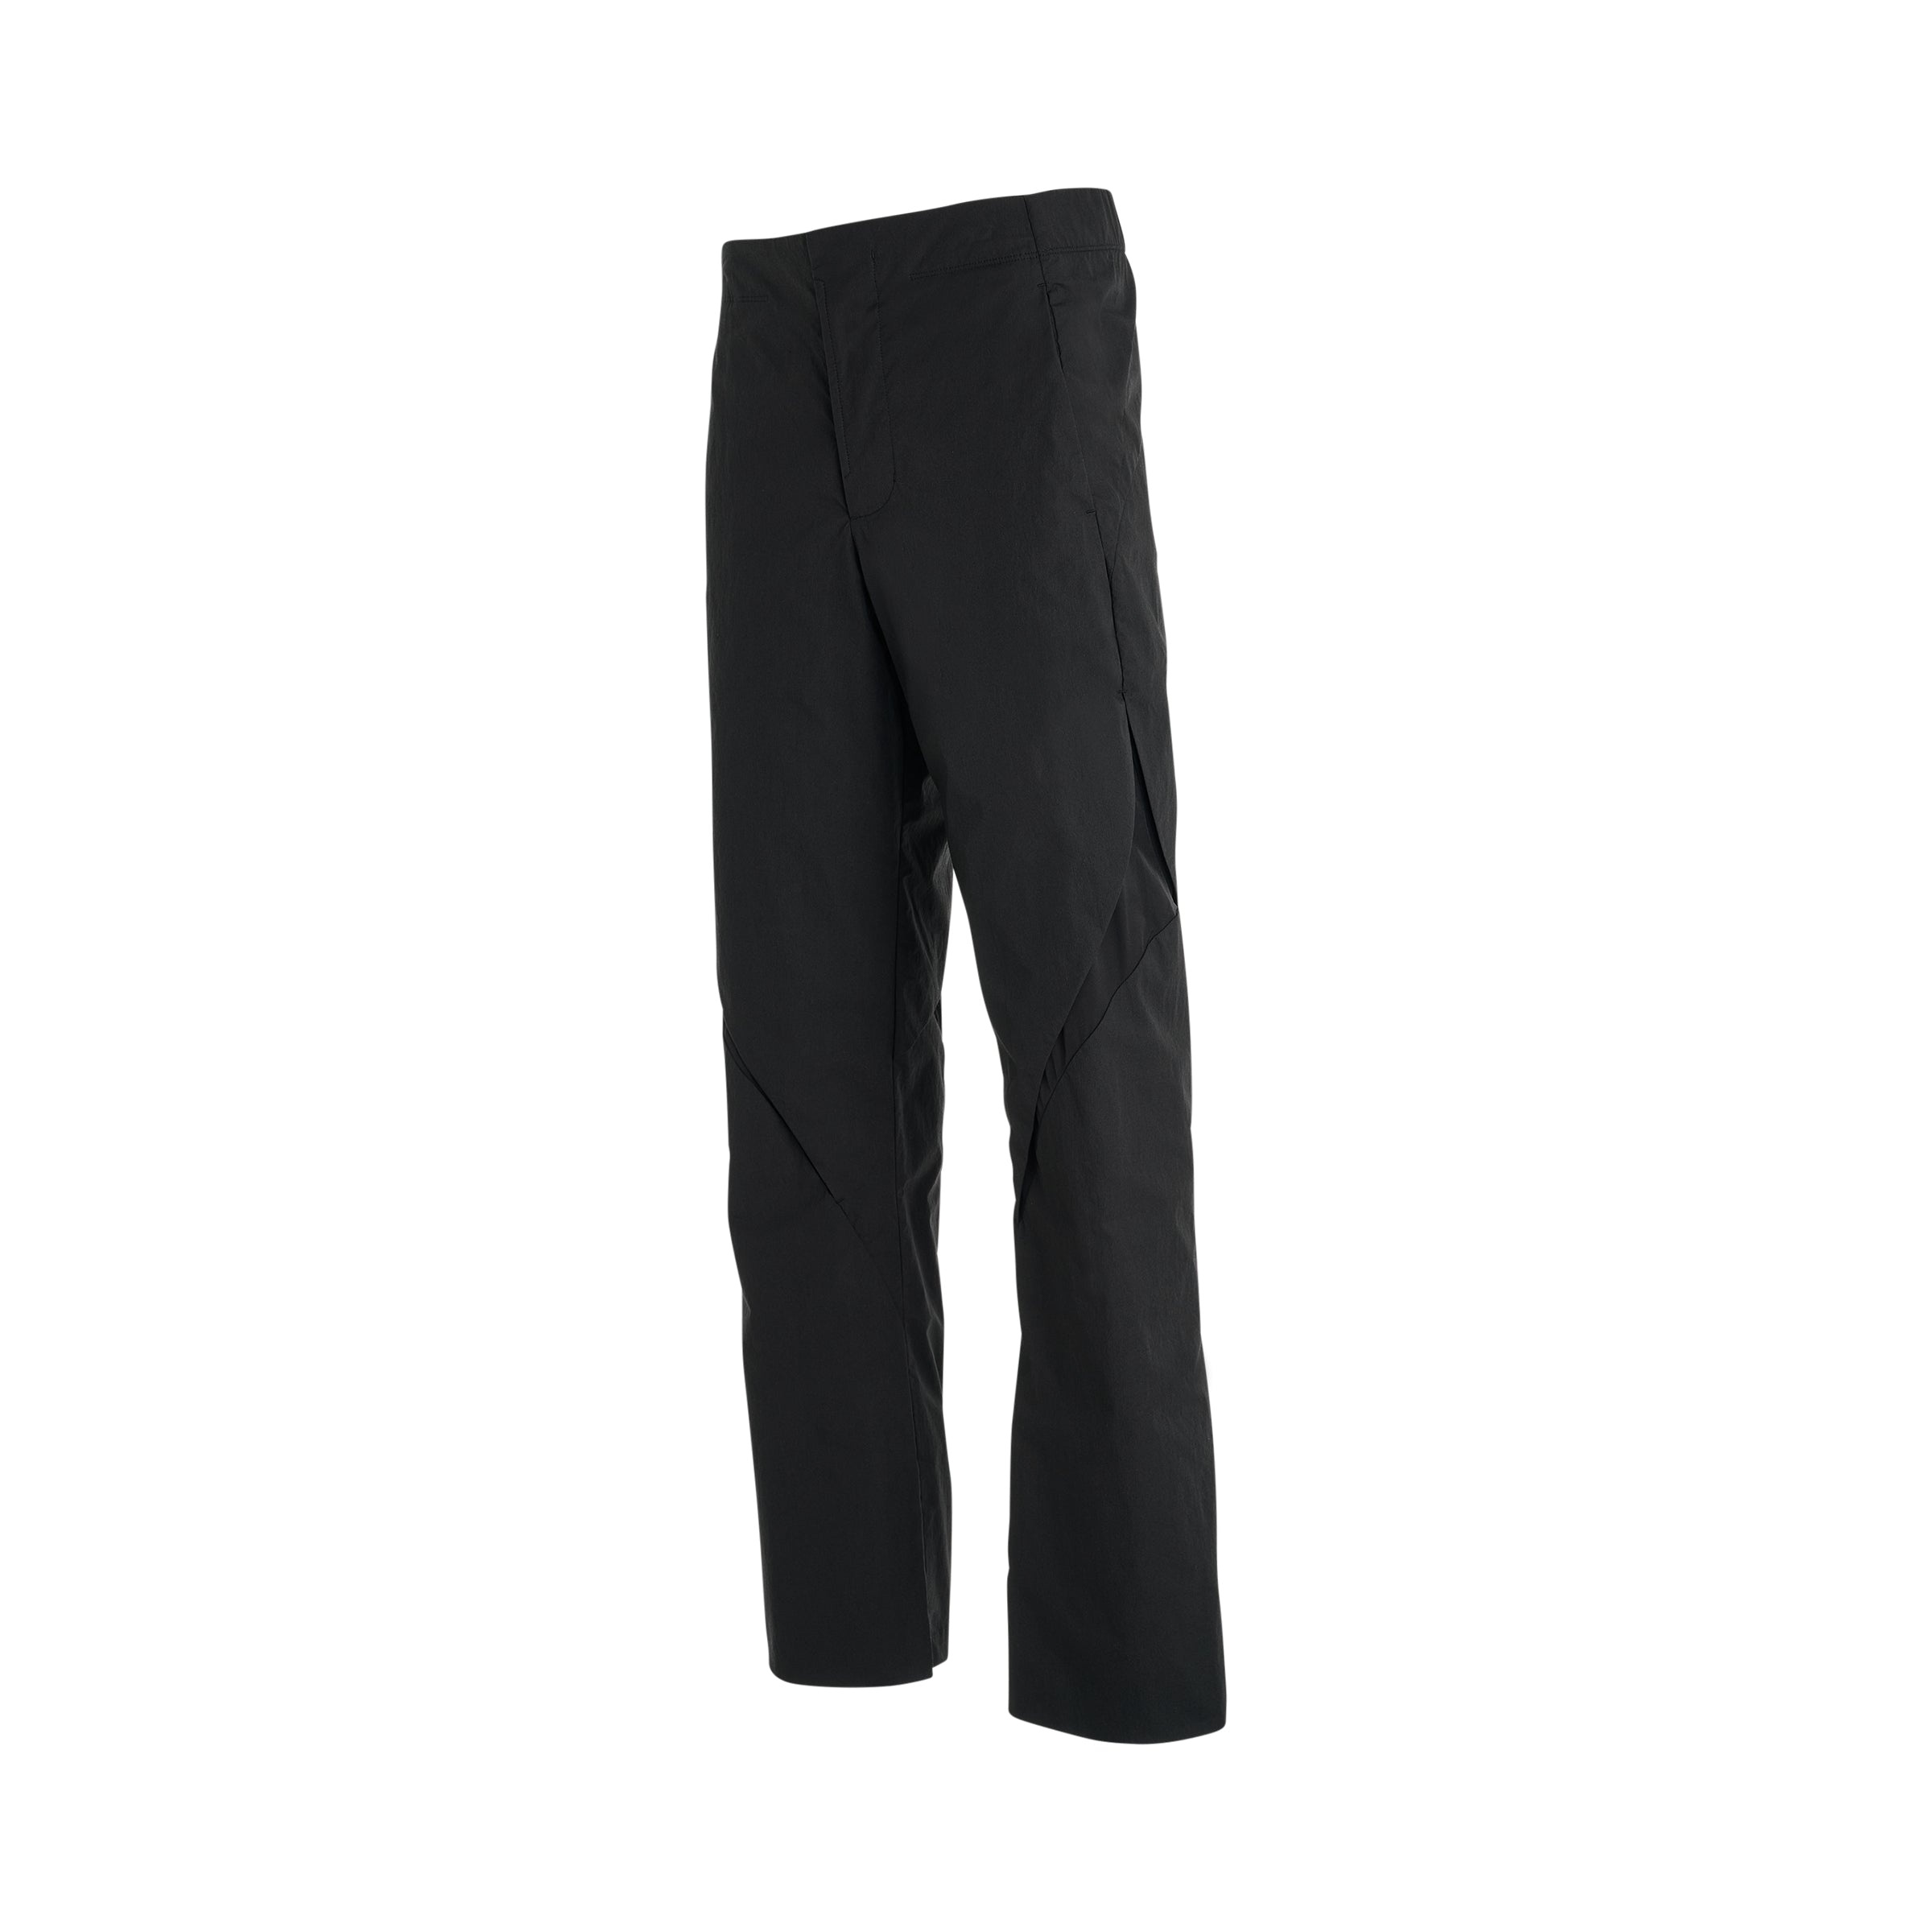 6.0 Technical Pants (Center) in Black - 2